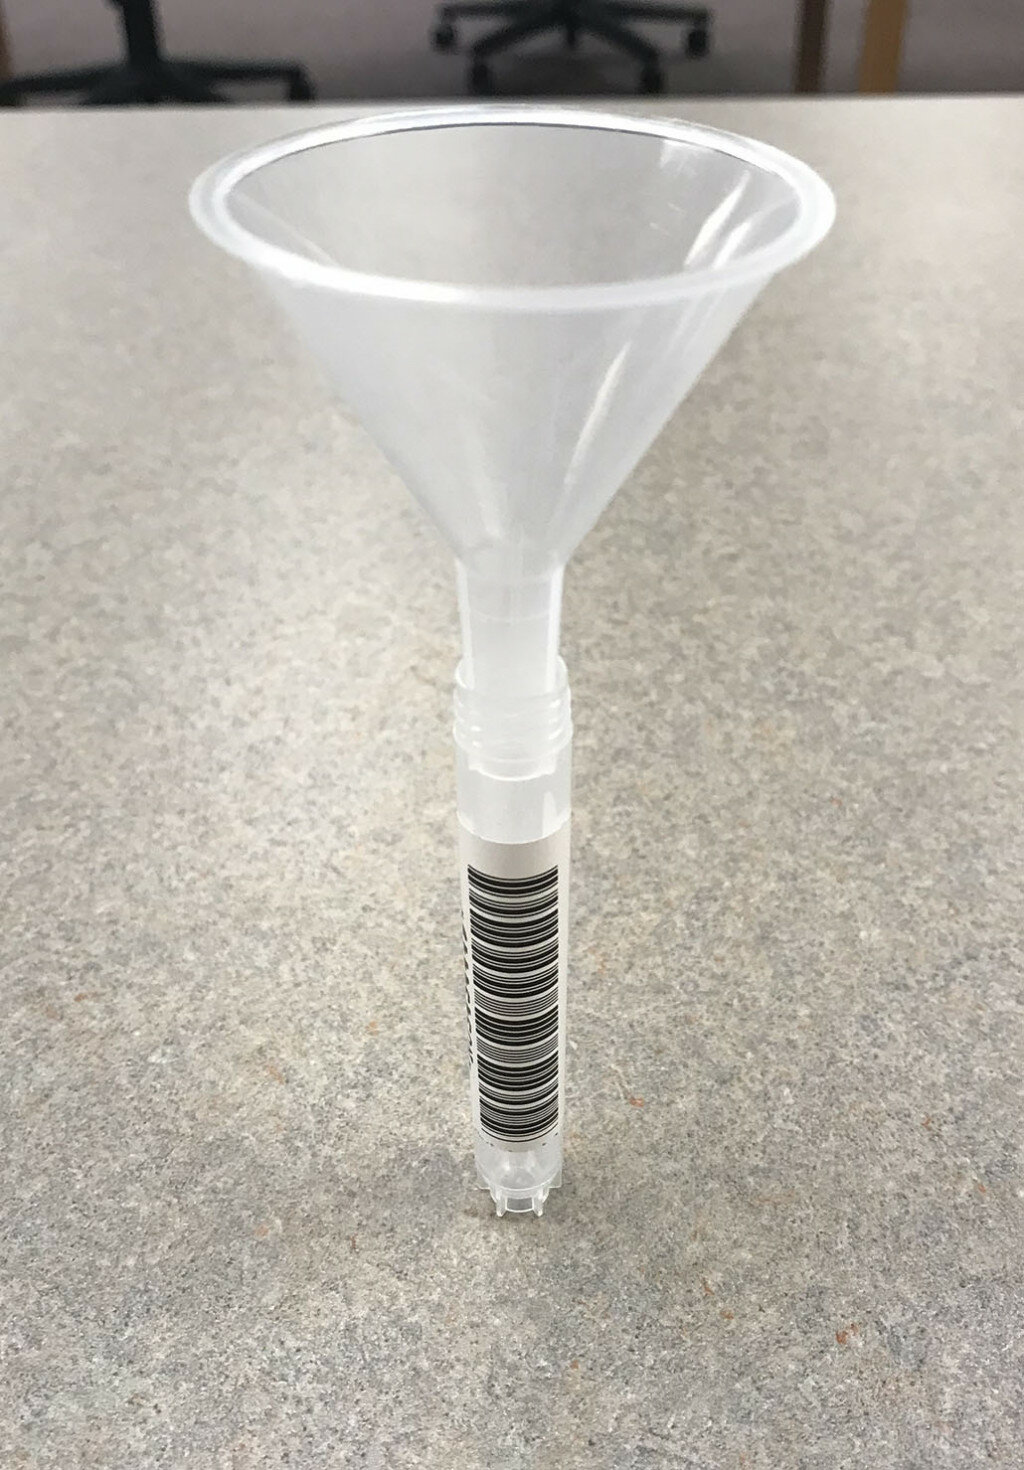 Vial used for the covidSHIELD saliva-based RT-PCR test.